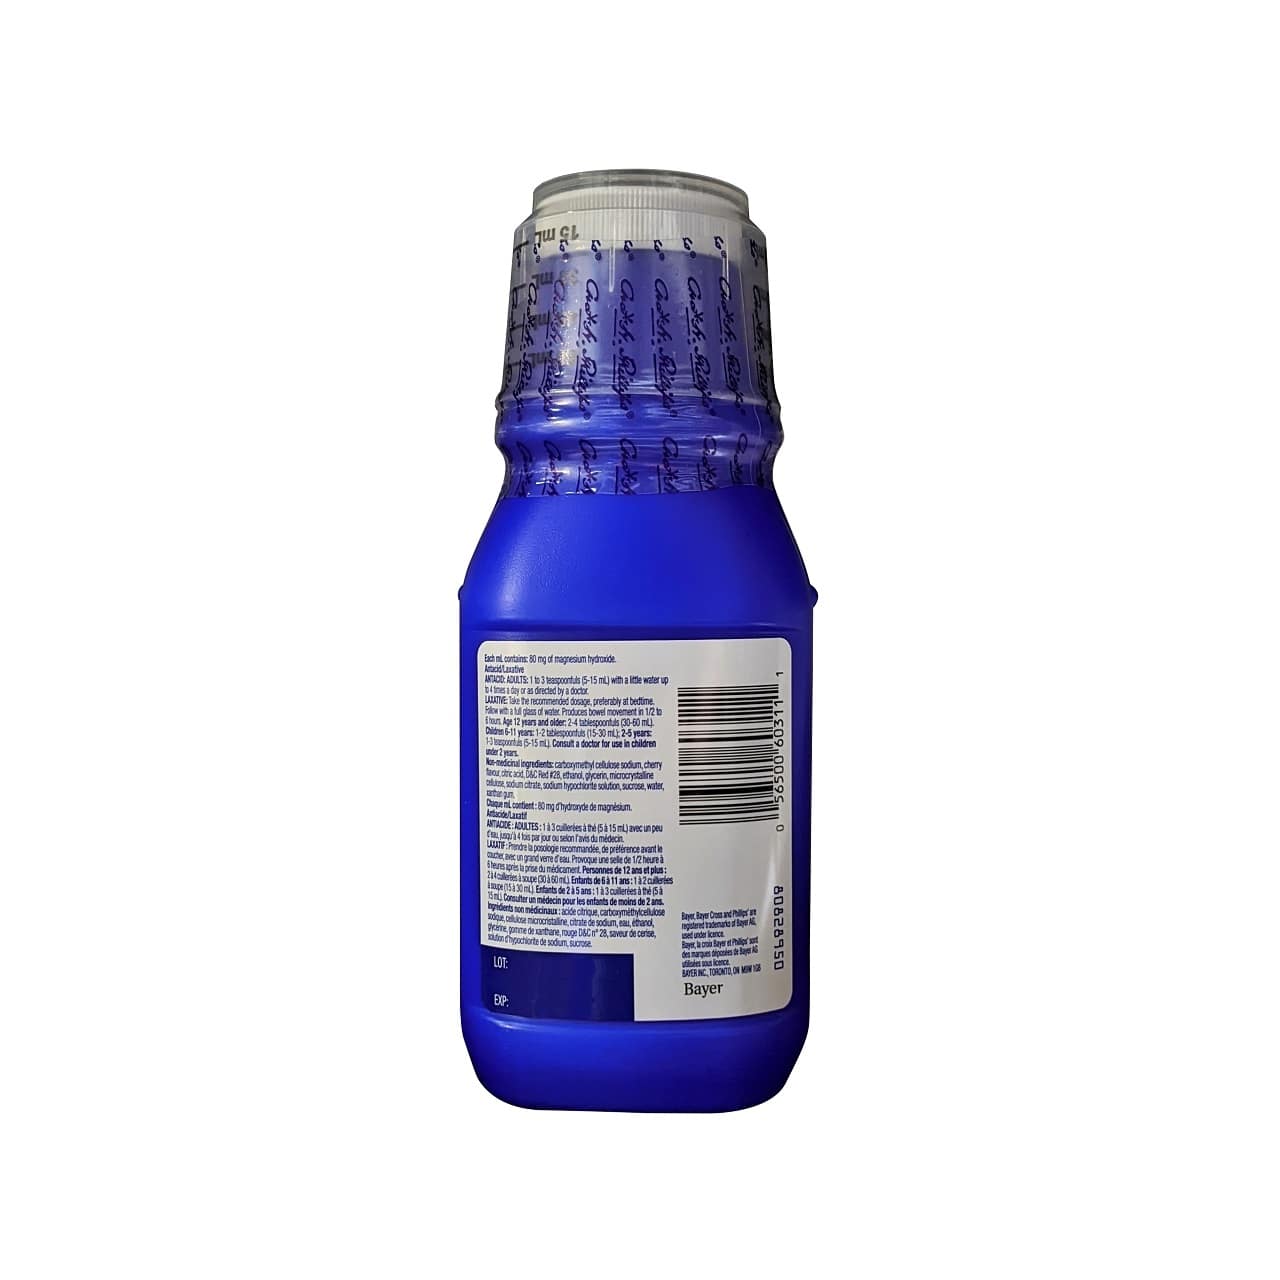 Directions, ingredients, cautions for Phillips Milk of Magnesia Cherry Flavour (350 mL)